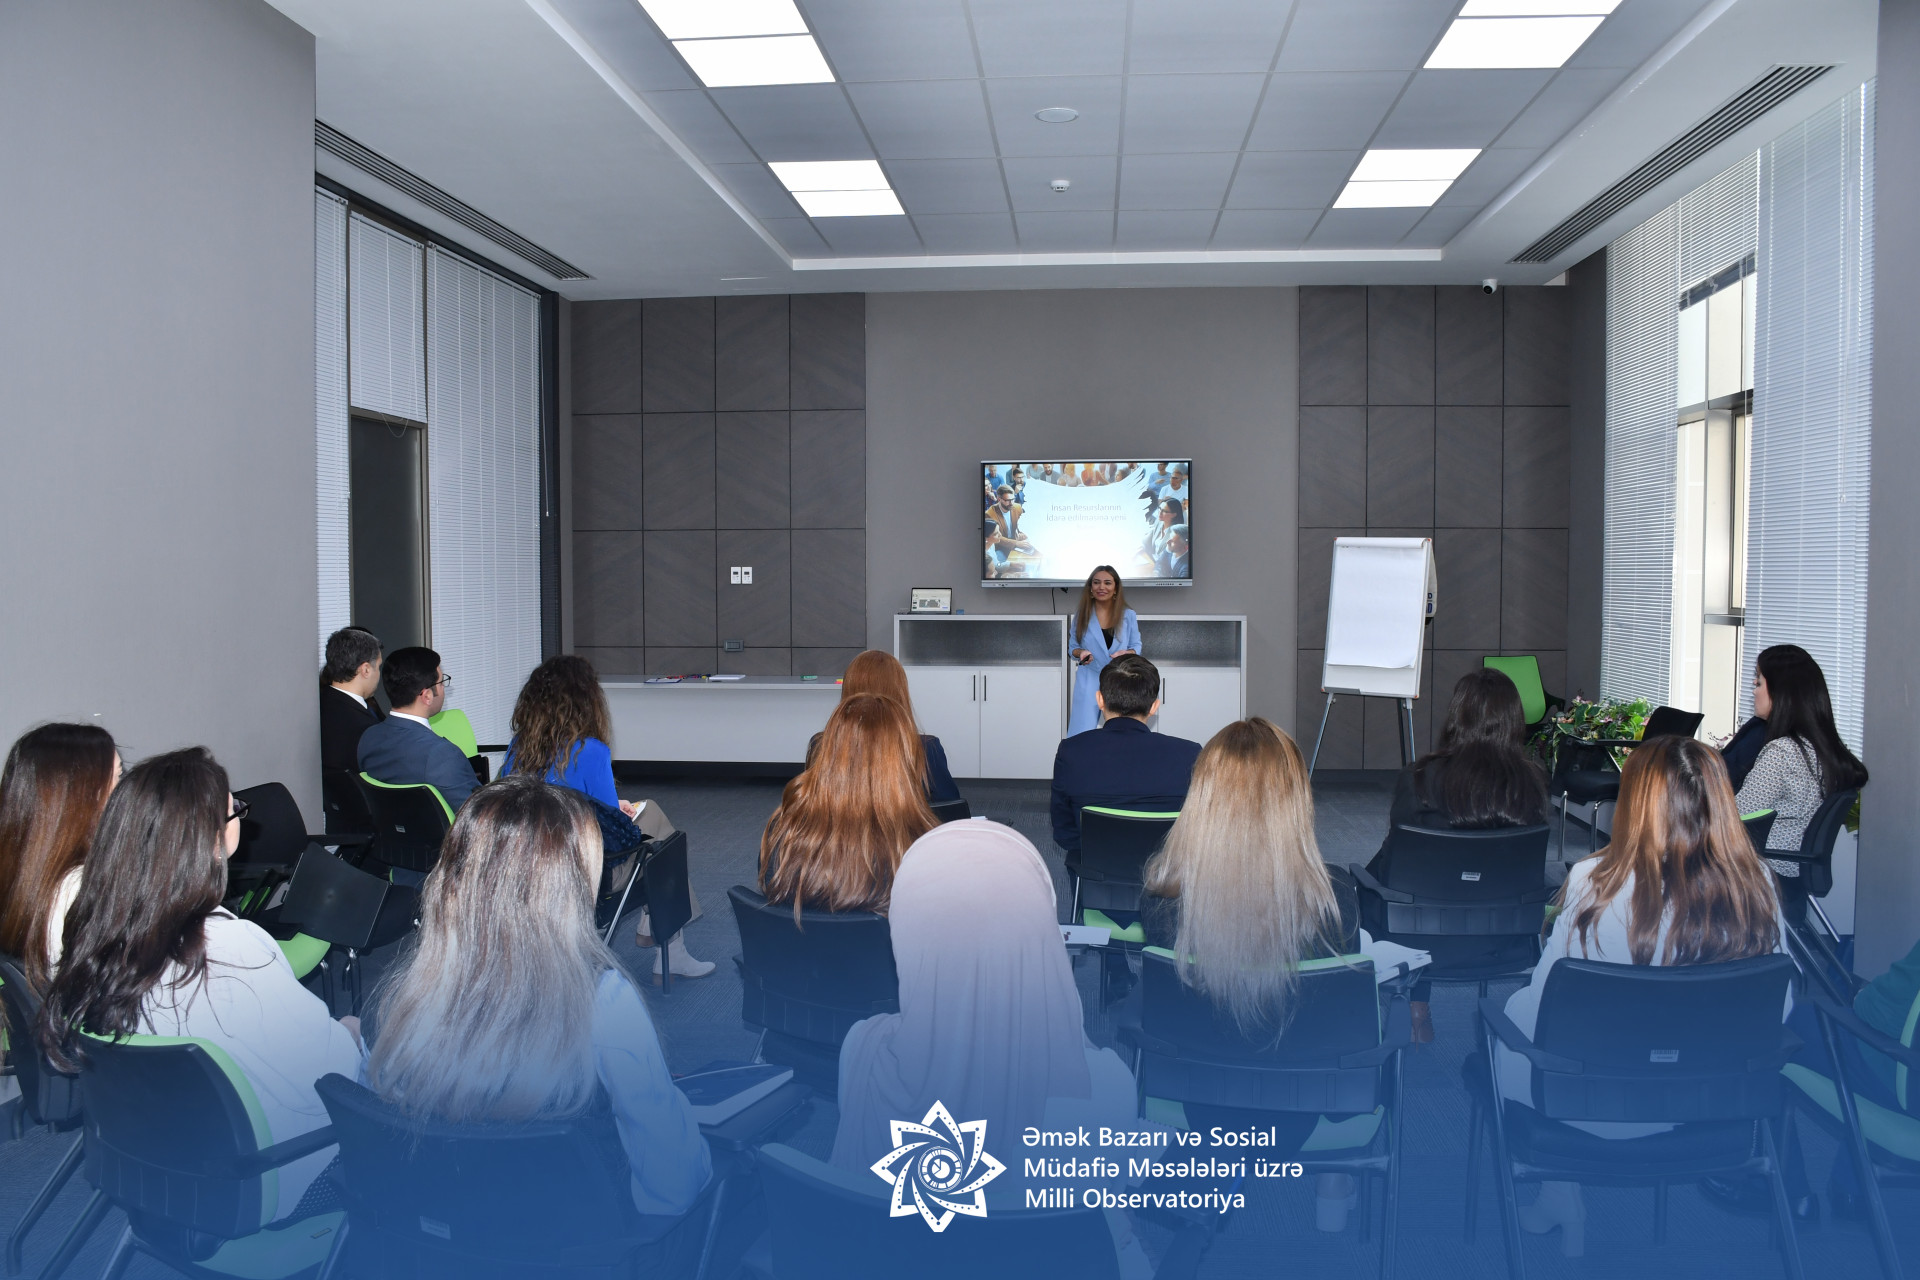 Master-class on modern and trending topics in the field of human resources was arranged